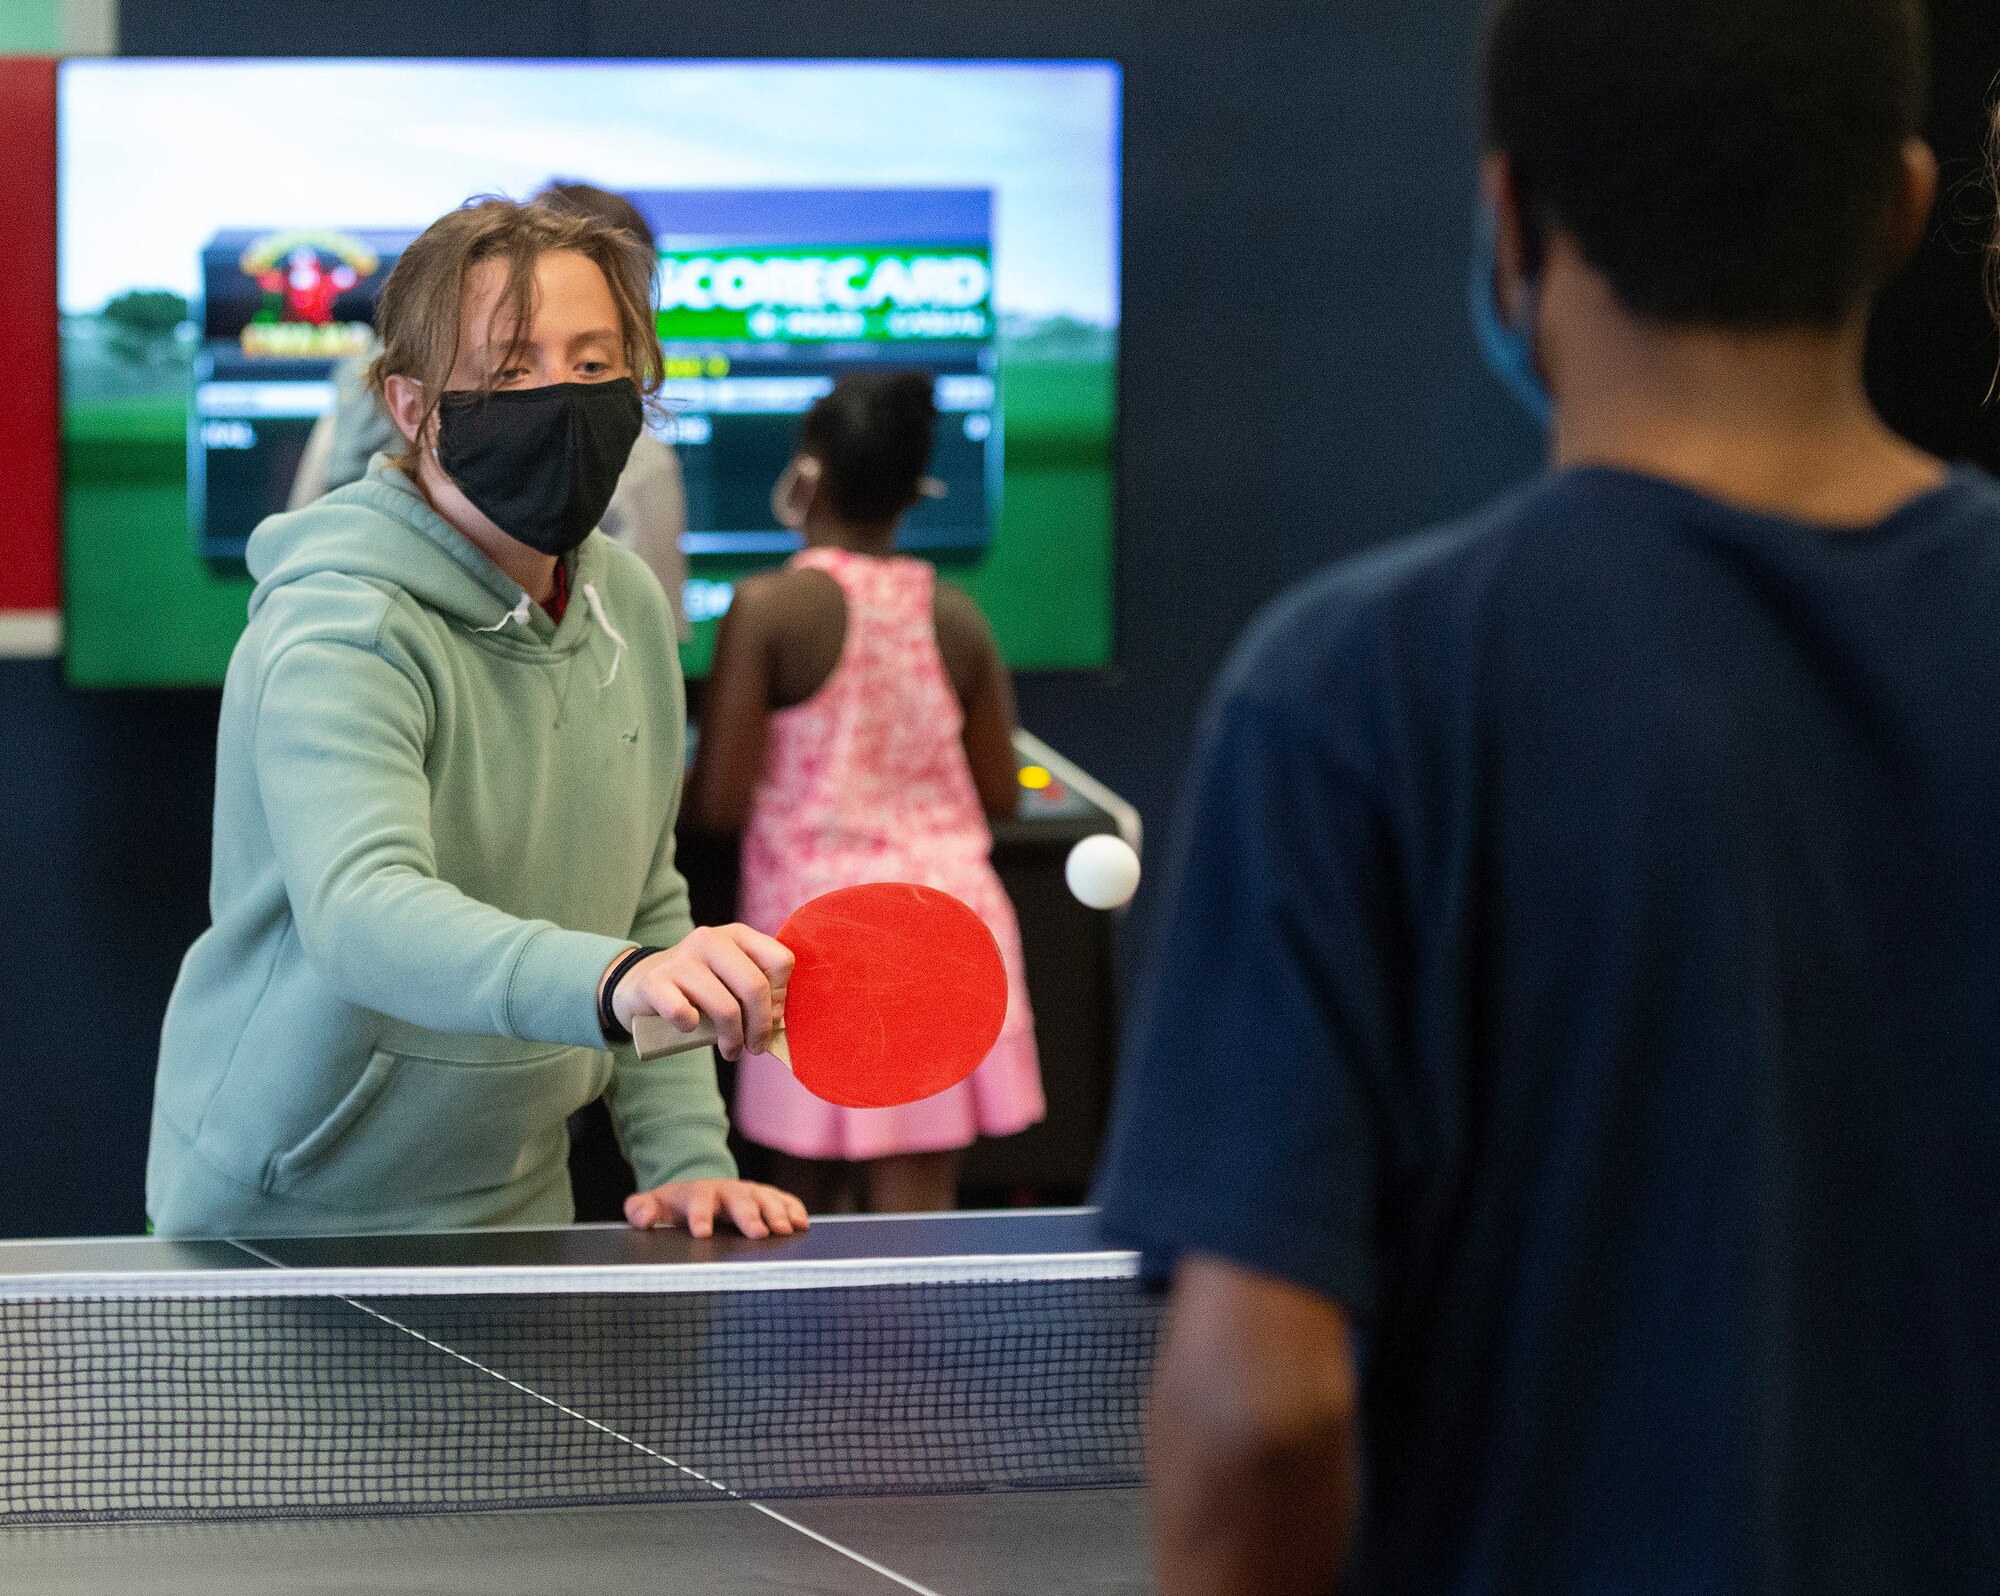 Brennen Rice, 11, returns a shot to Matthew Williams, 17, during a game of pingpong June 10, 2021. The two were competing in the new game room opening at the 88th Force Support Squadron’s Prairies Youth Center. (U.S. Air Force photo by R.J. Oriez)